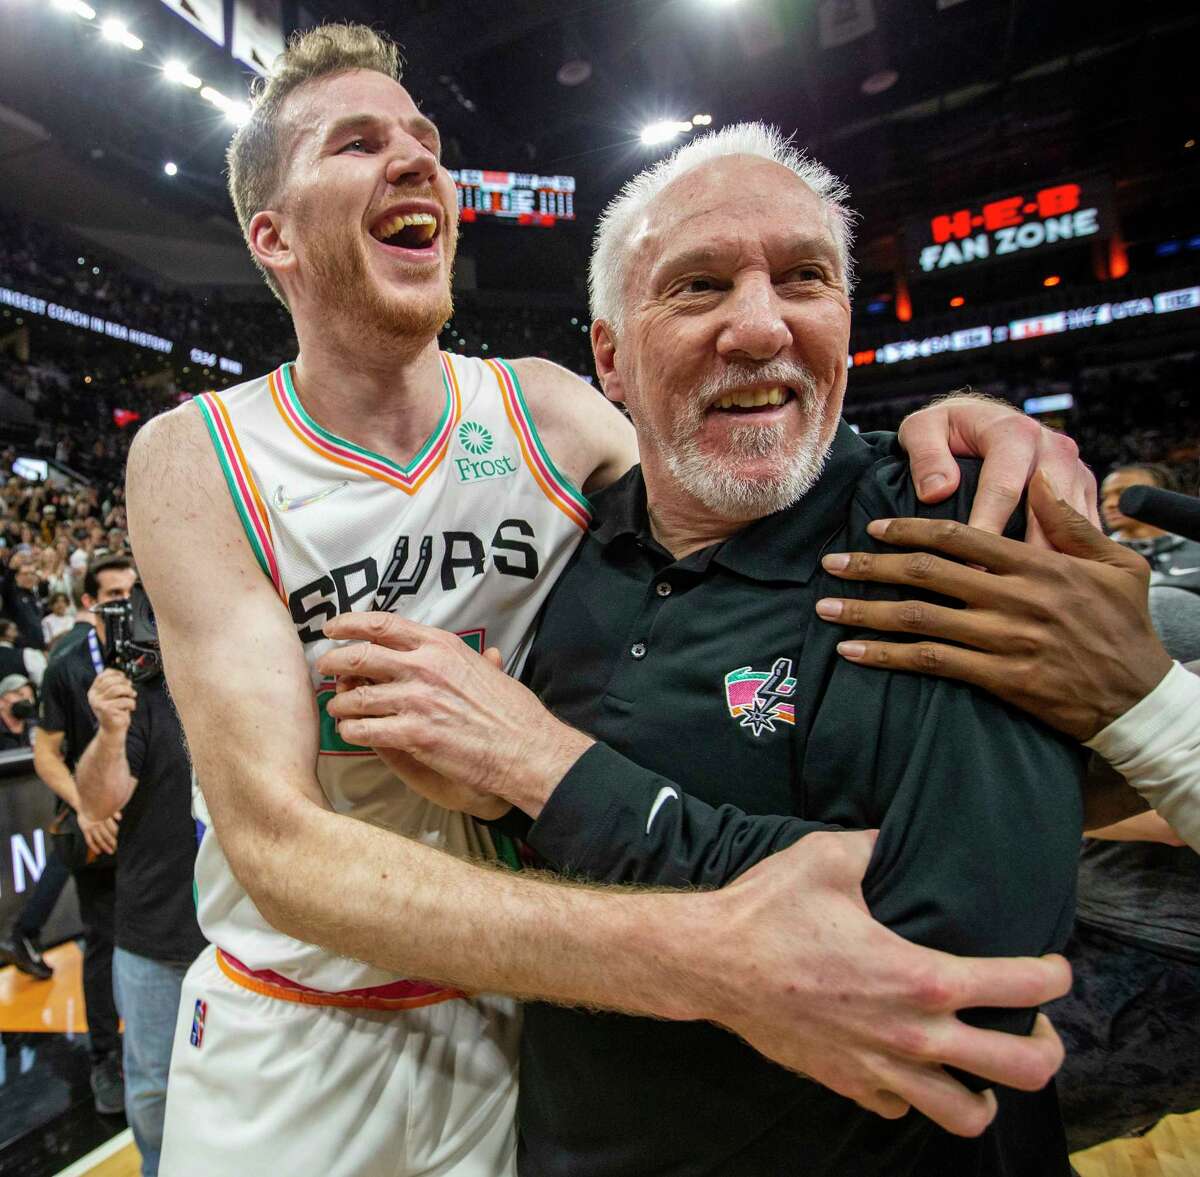 San Antonio Spurs head coach Gregg Popovich celebrates Friday, Mar 11, 2022 at the AT&T Center in San Antonio with San Antonio Spurs center Jakob Poeltl (25) after the Spurs beat the Utah Jazz 104-102. The win gives Popovich 1.336 wins and gives him the most regular season wins in NBA history.